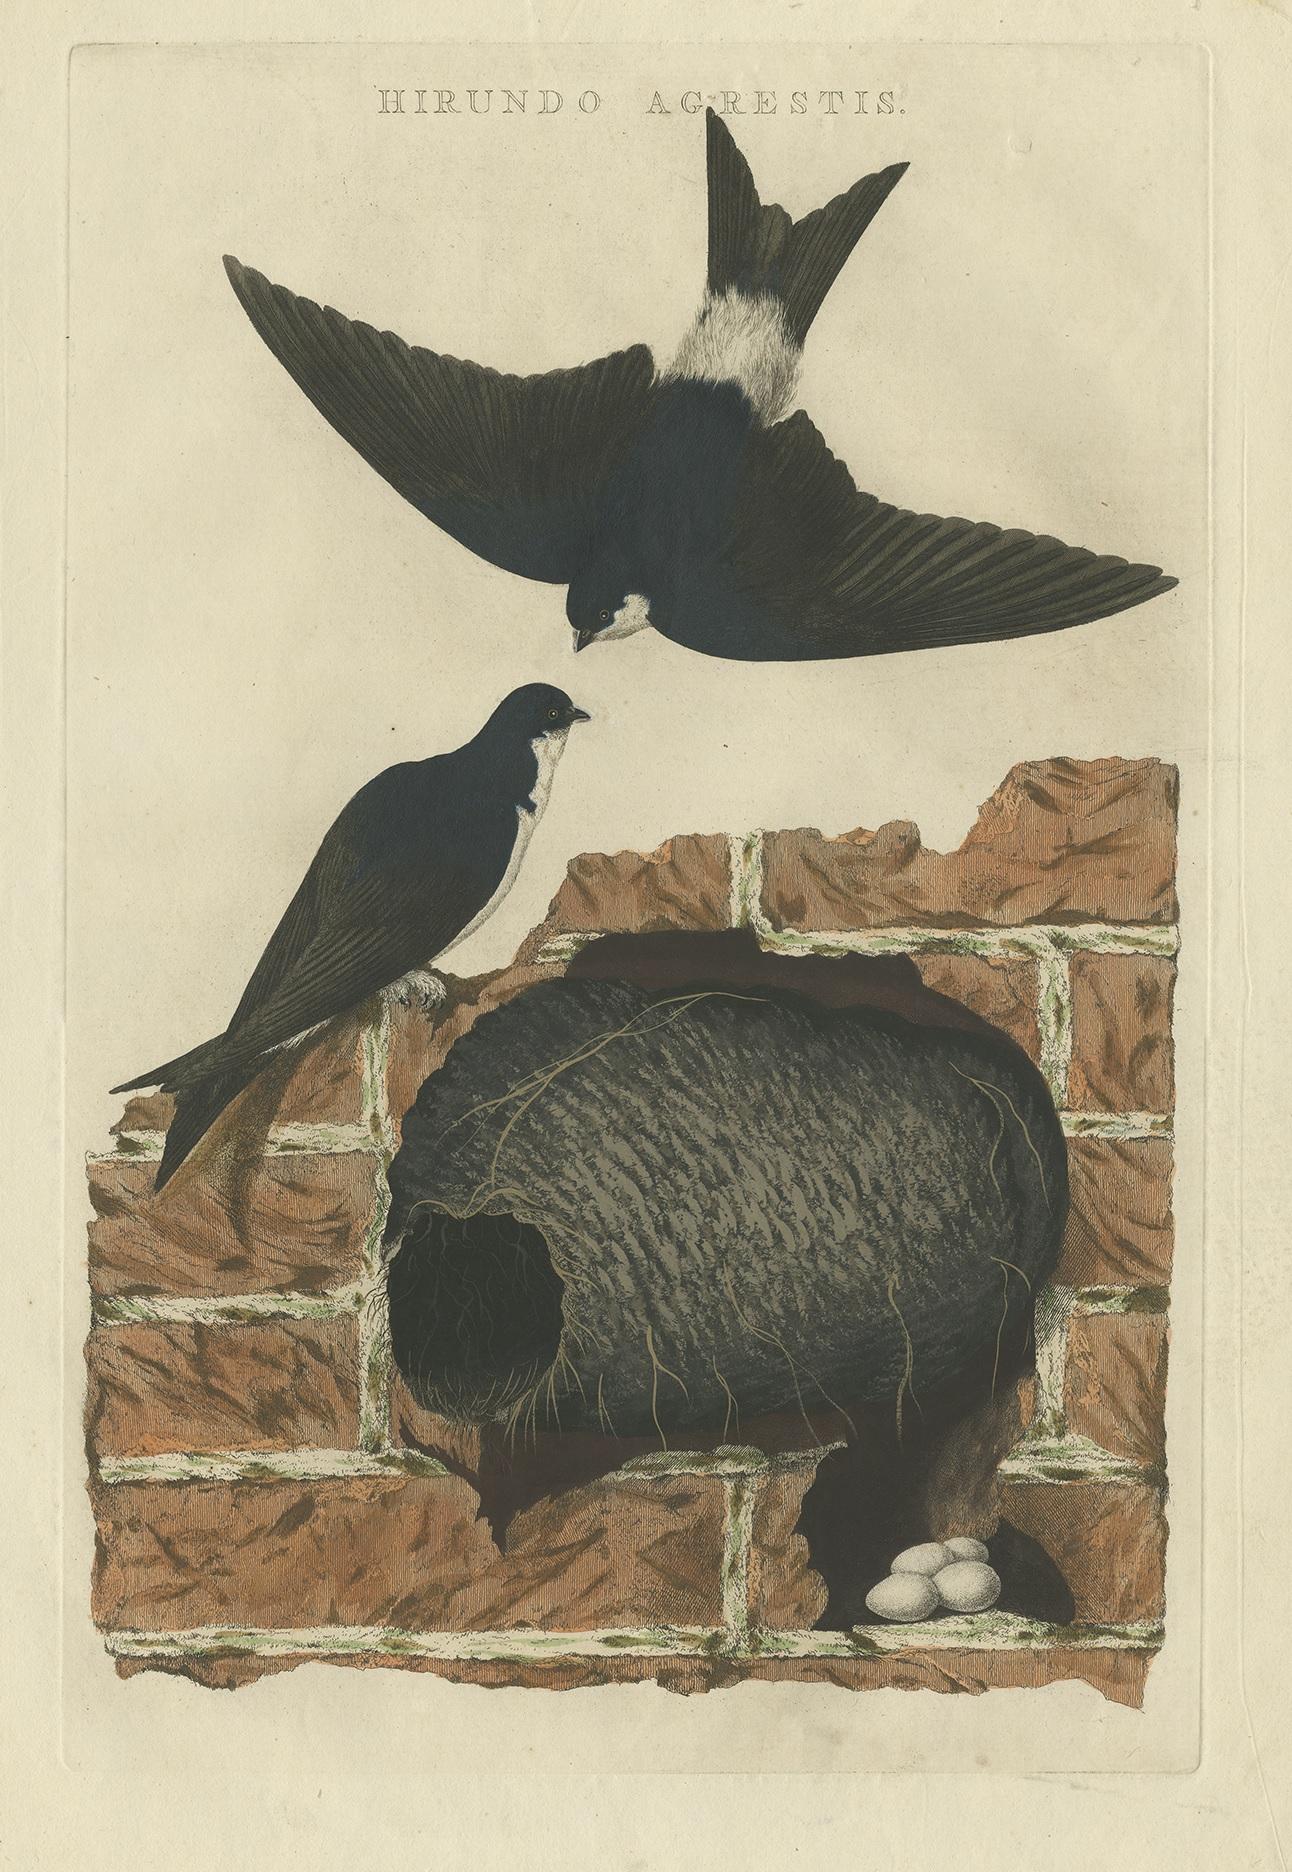 Antique print titled ‘Hirundo Agrestis'. This print depicts the barn swallow with nest and eggs (Dutch: boerenzwaluw). The barn swallow (Hirundo rustica) is the most widespread species of swallow in the world. It is a distinctive passerine bird with